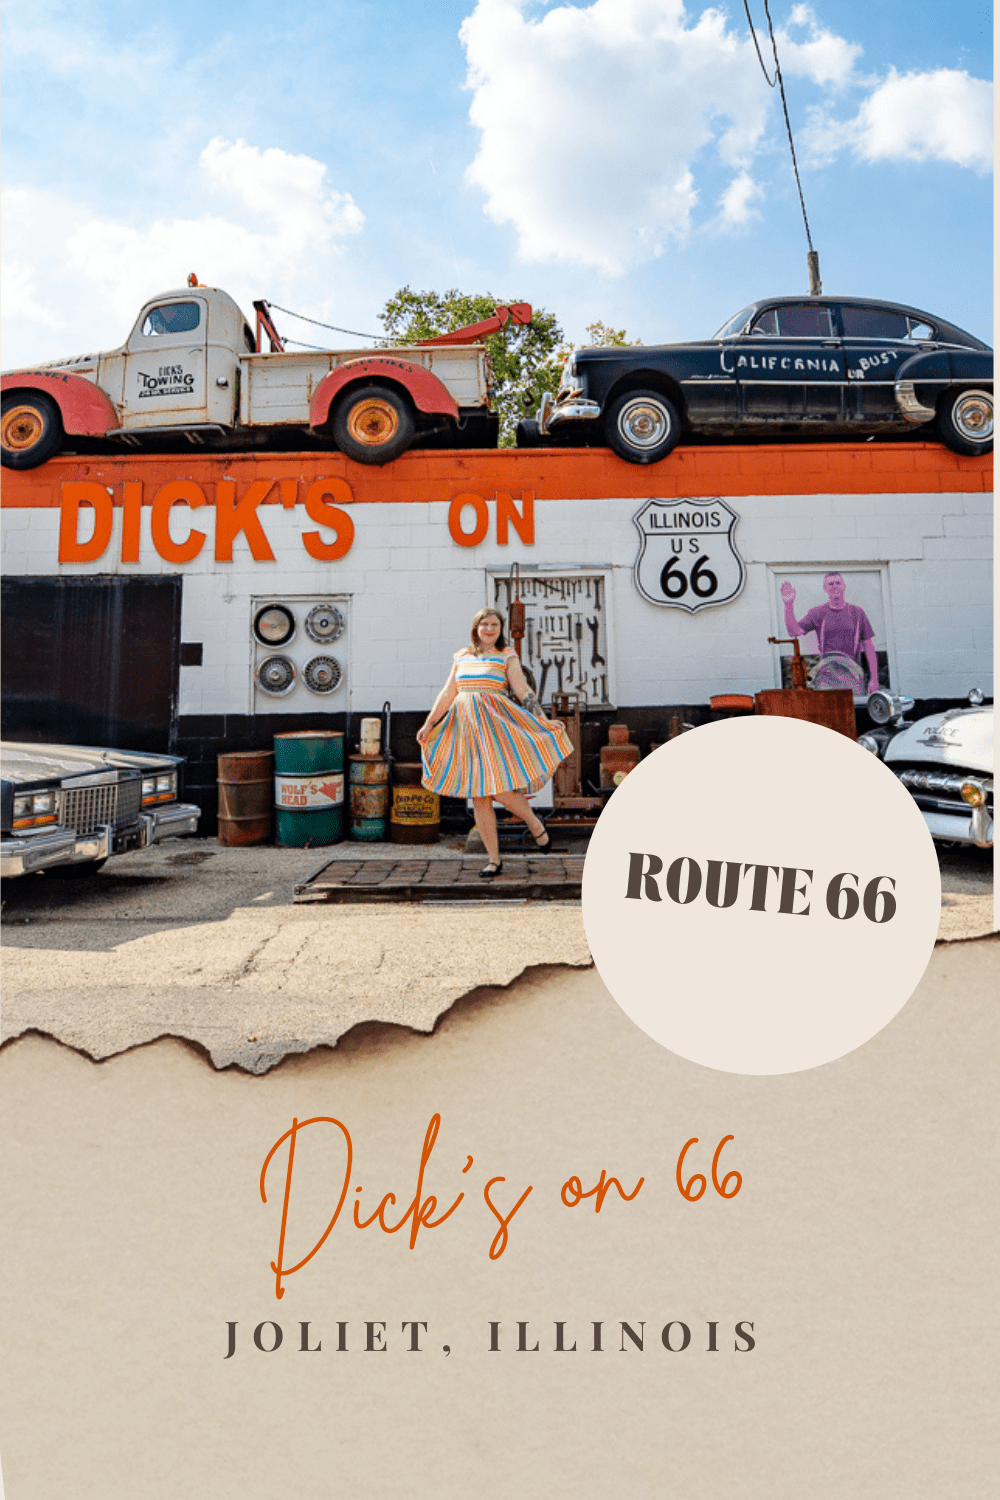 Whether you need a car towed or want to see some vintage cars, this Route 66 roadside attraction is for you. Dick's on 66 in Joliet, Illinois (AKA Dick's Towing) features old cars on their roof and a slice of the Mother Road at a real Joliet business. Visit on a Route 66 road trip through Illinois!  #RoadTrips #RoadTripStop #Route66 #Route66RoadTrip #IllinoisRoute66 #Illinois #IllinoisRoadTrip #IllinoisRoadsideAttractions #RoadsideAttractions #RoadsideAttraction #RoadsideAmerica #RoadTrip